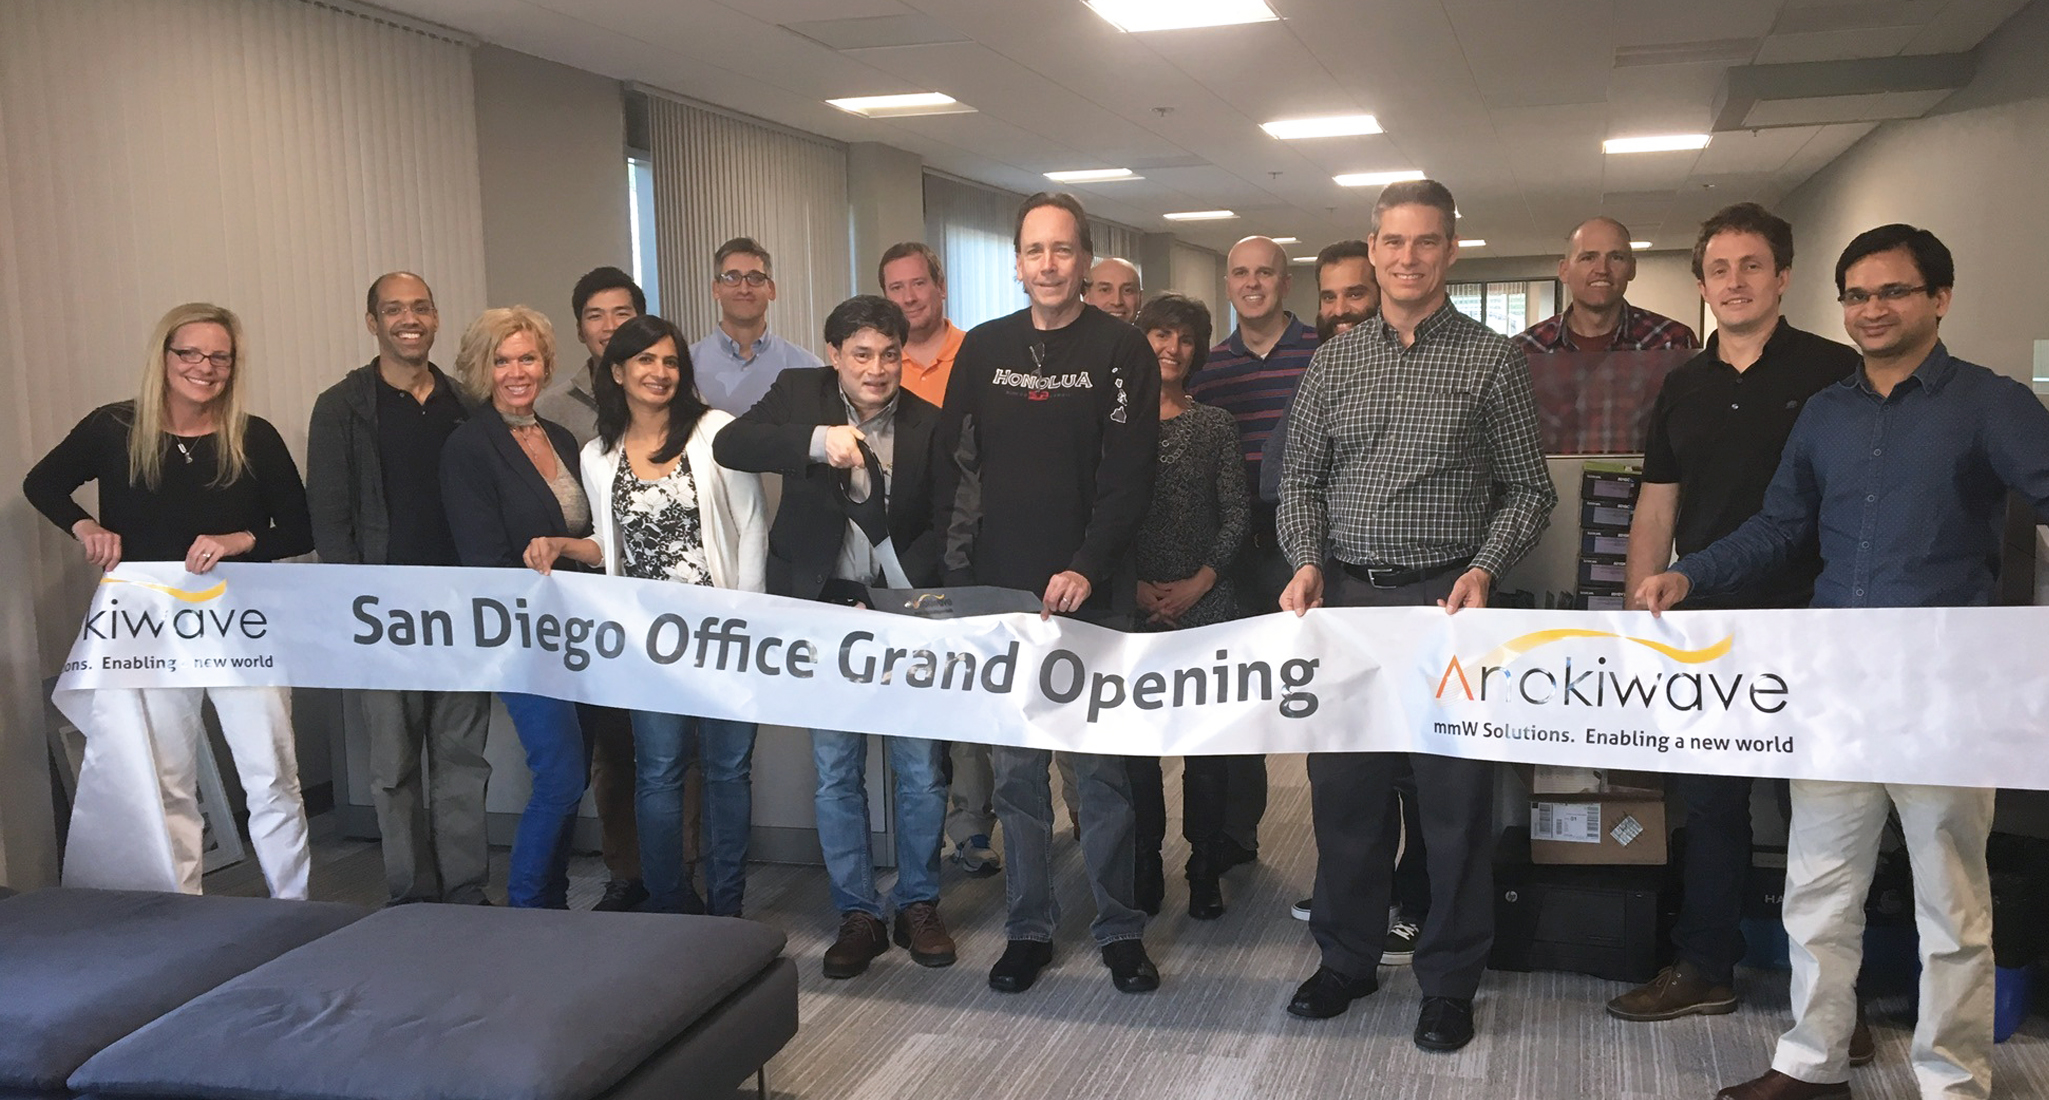 Anokiwave founders Nitin and Deepti Jain at the ribbon cutting ceremony for the new San Diego office.